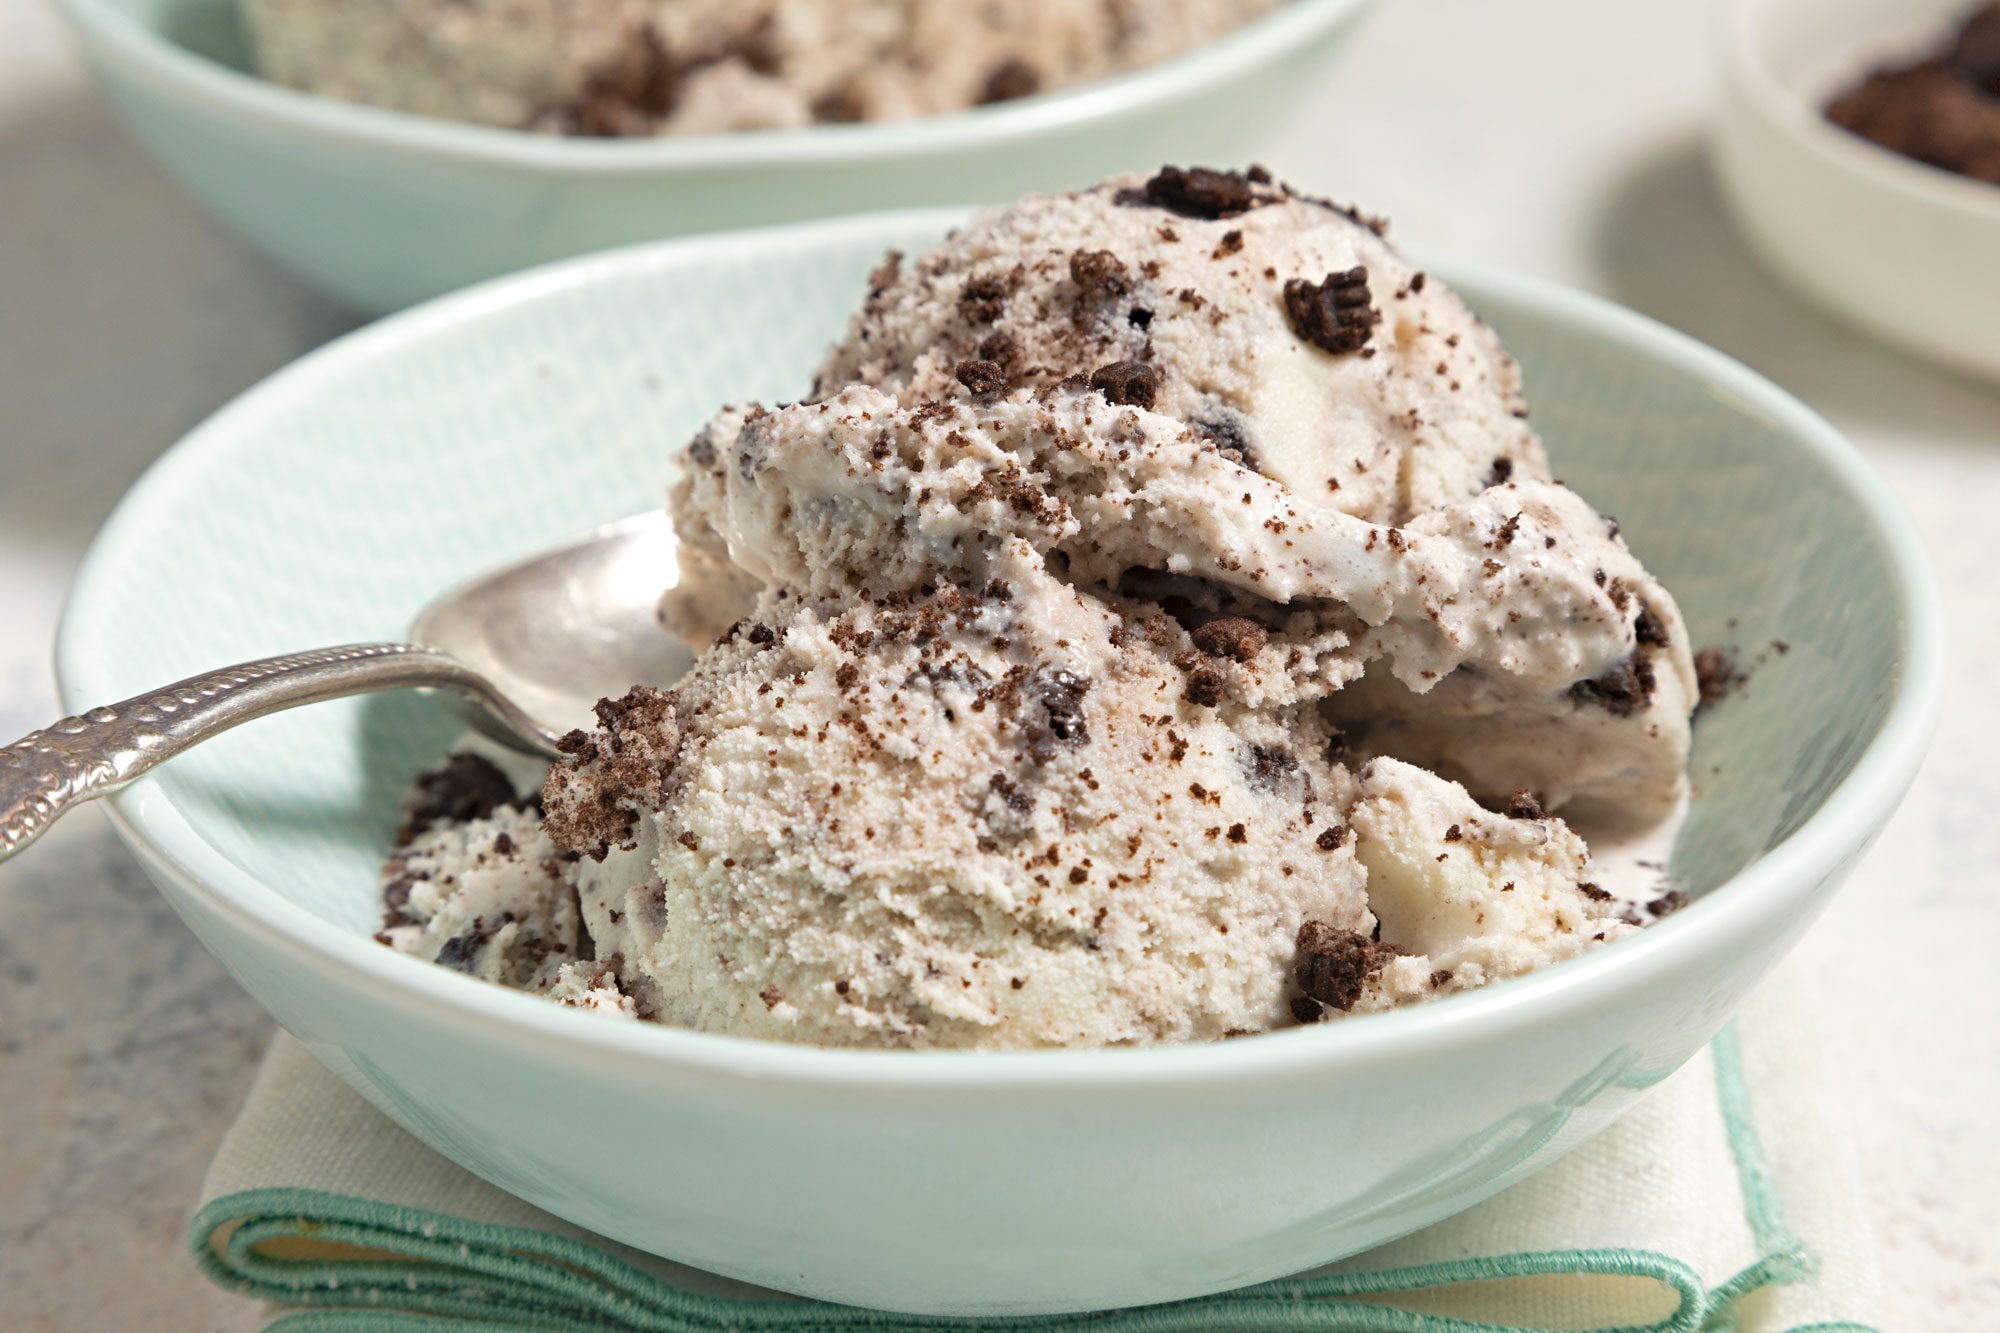 Indulgent bowl of Cookies and Cream Ice Cream garnished with cookies